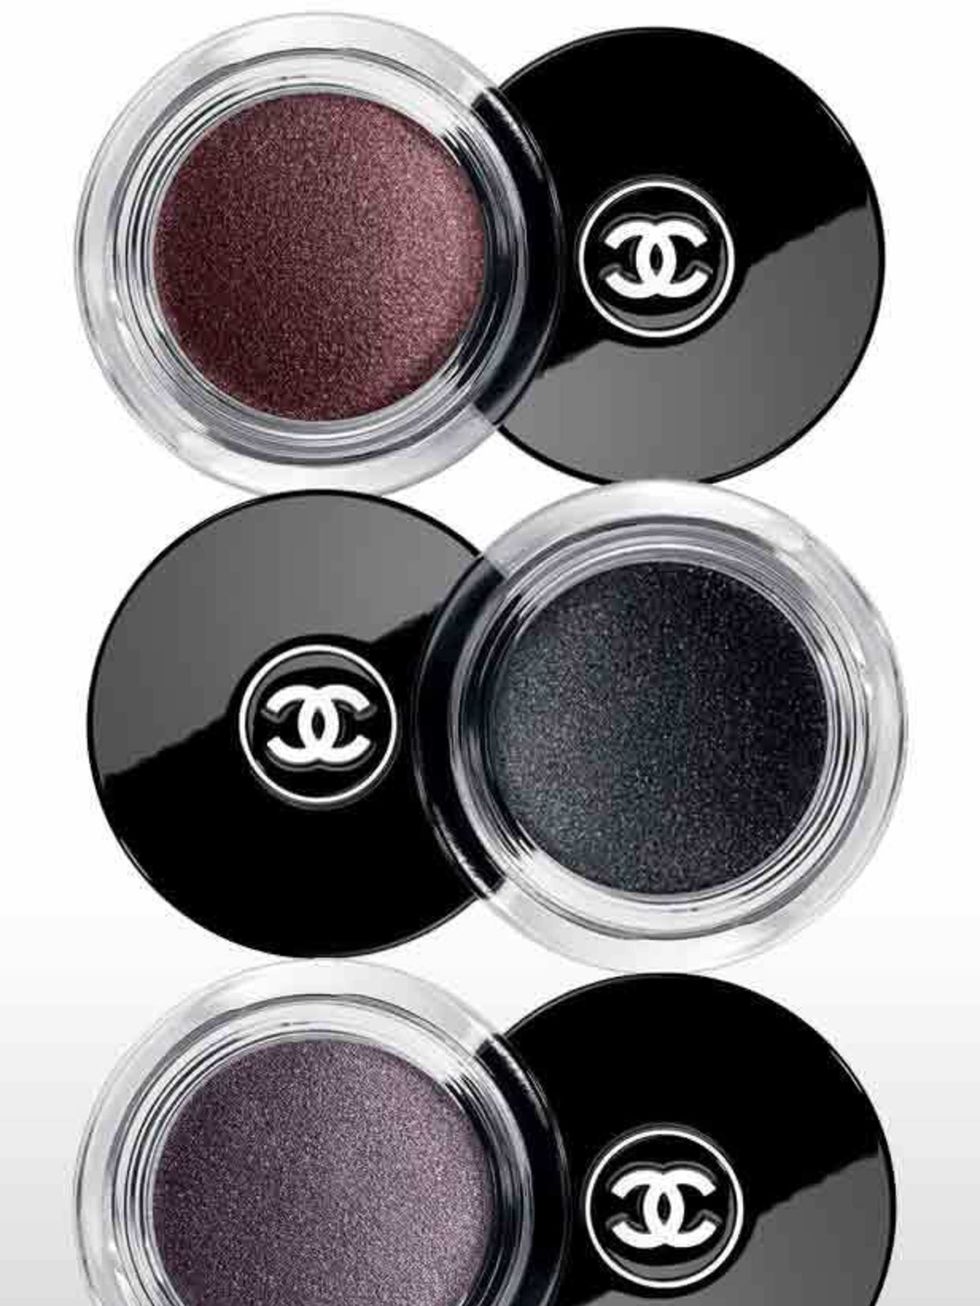 <p>The smoky dark eye shadow is so wearable in the evenings, and I love how you can just use your fingers to rub the shade in to give it an undone finish.</p><p>Chanel Illusion DOmbre, £22.50 (launches 19 August)</p>